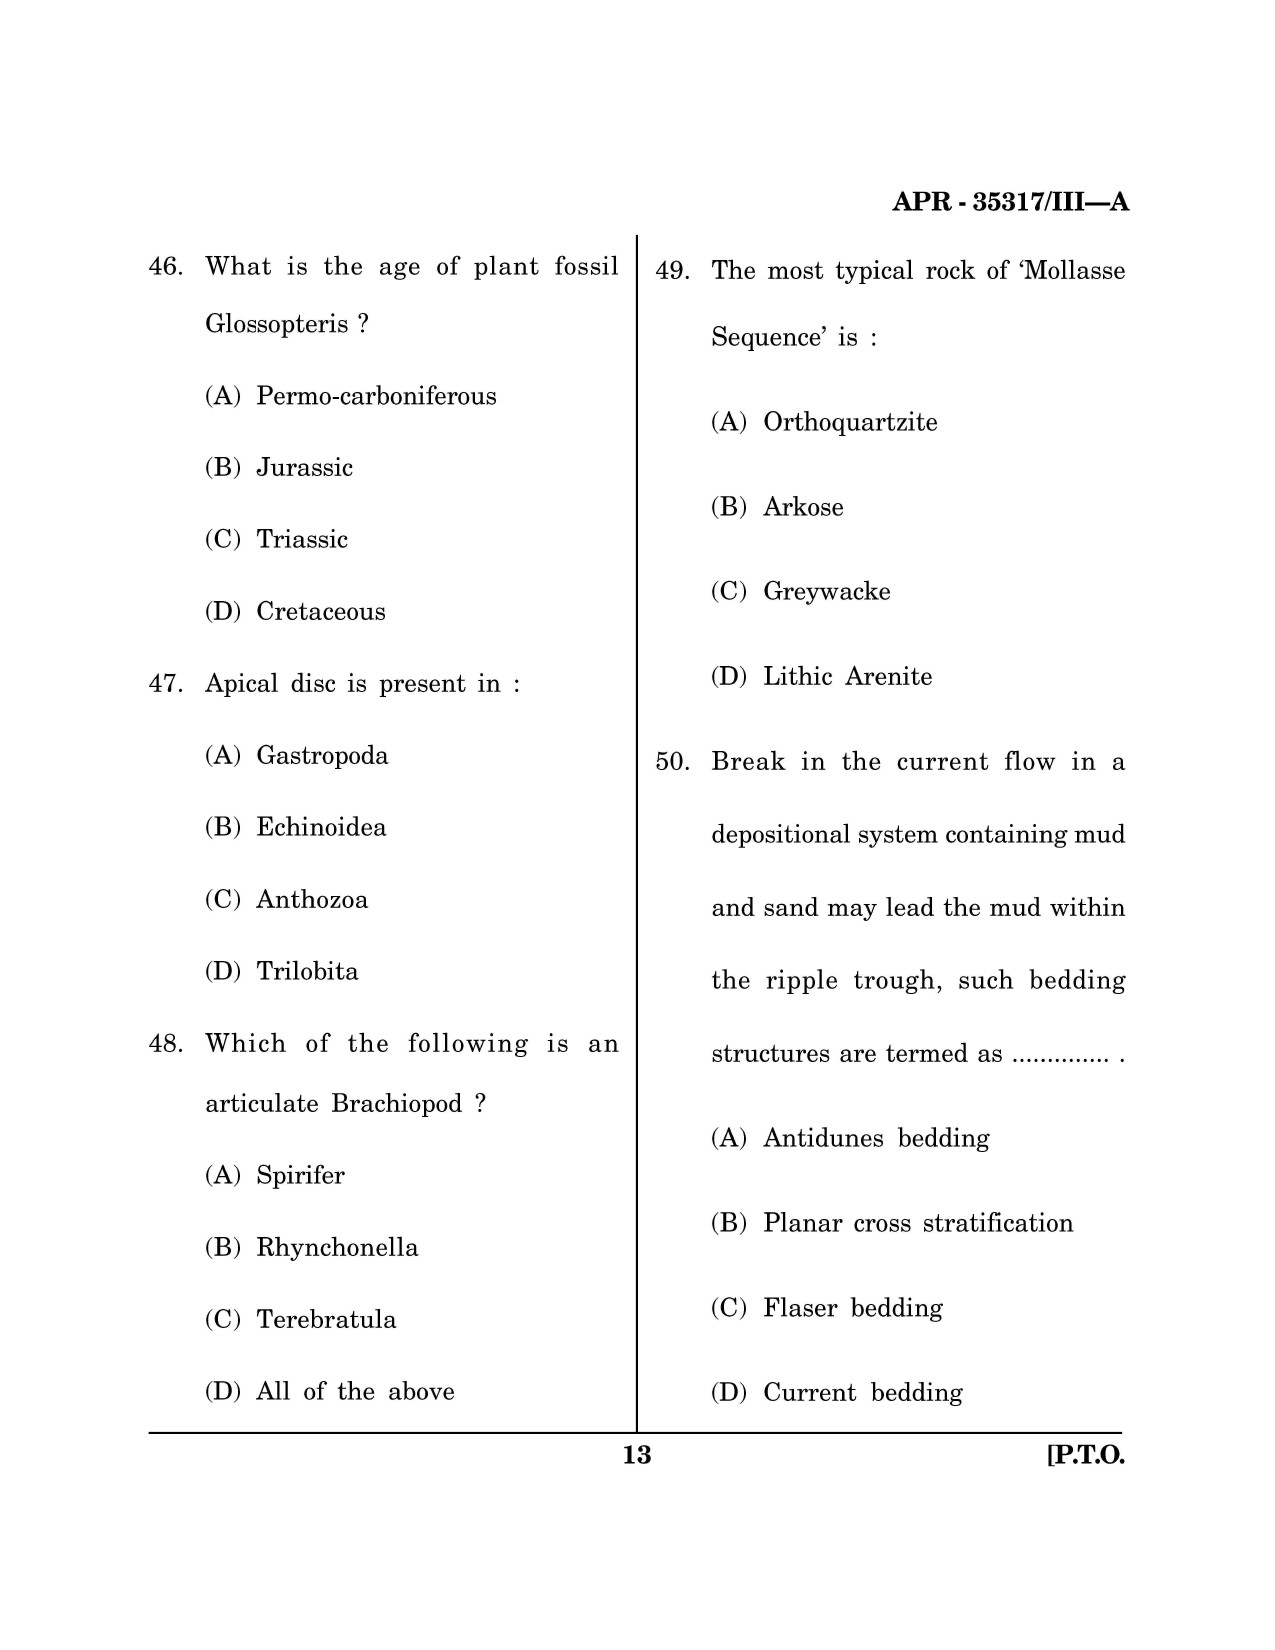 Maharashtra SET Earth Atmospheric Ocean Planetary Science Question Paper III April 2017 12